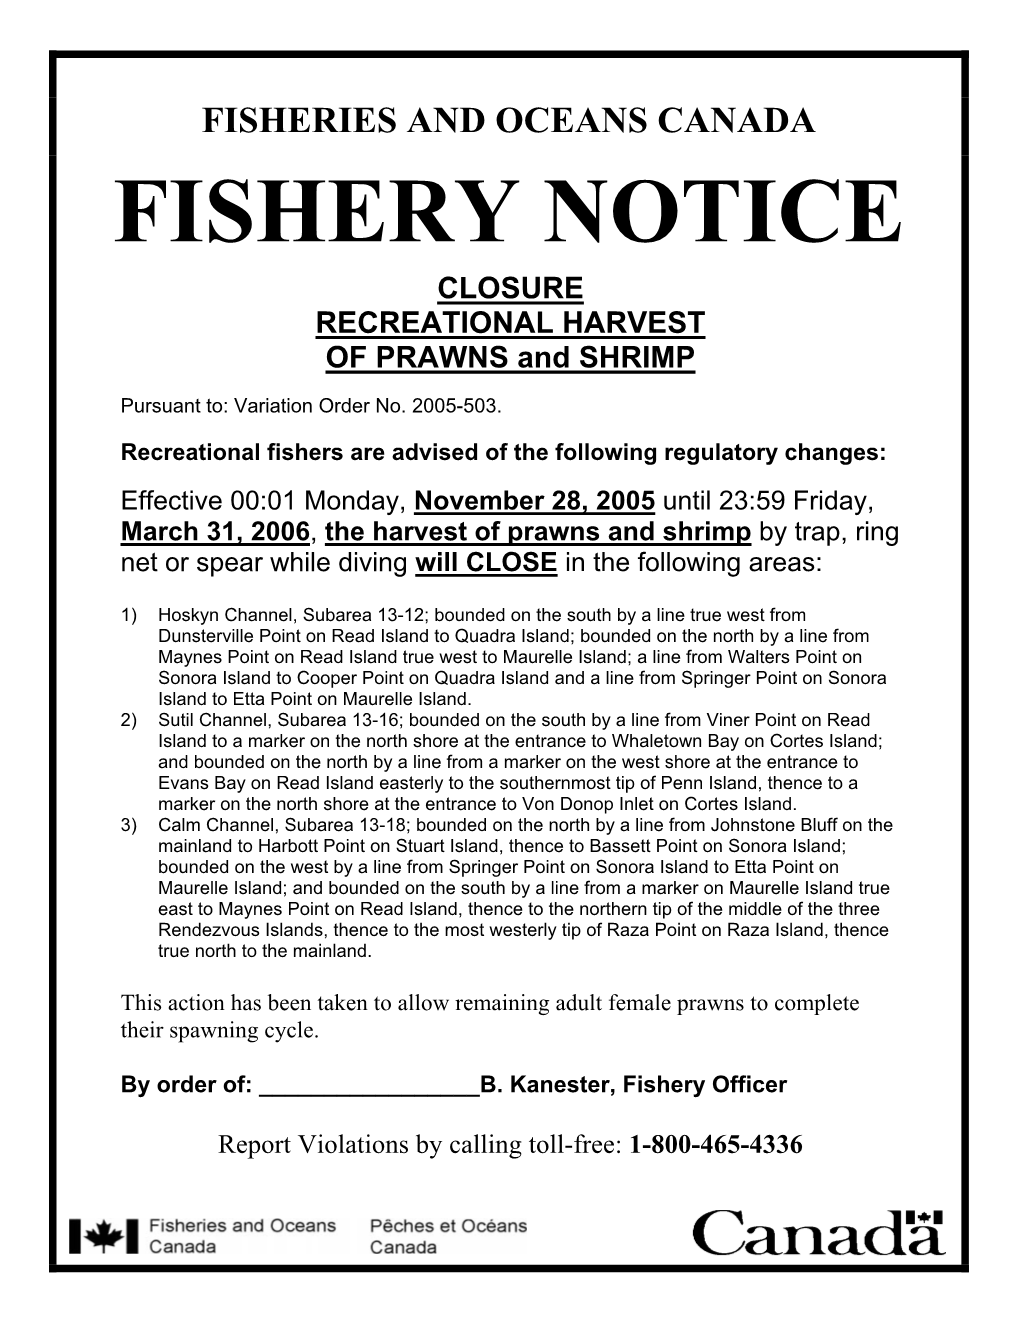 Notice to Recreational Harvesters of Shrimp and Prawns